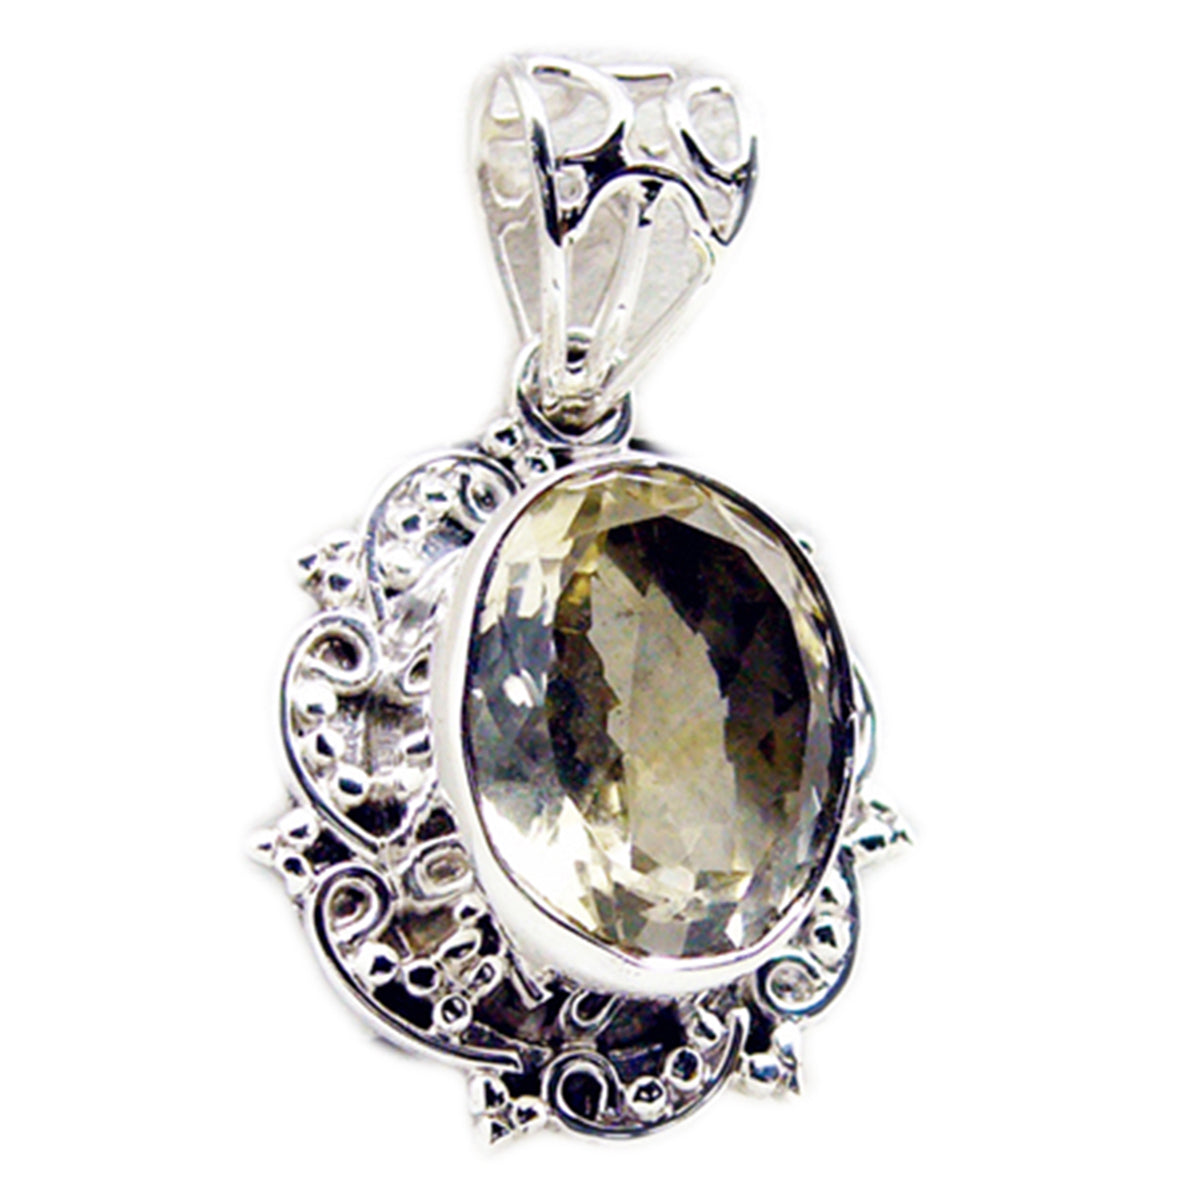 Riyo Genuine Gems Oval Faceted Yellow Citrine Solid Silver Pendant engagement gift